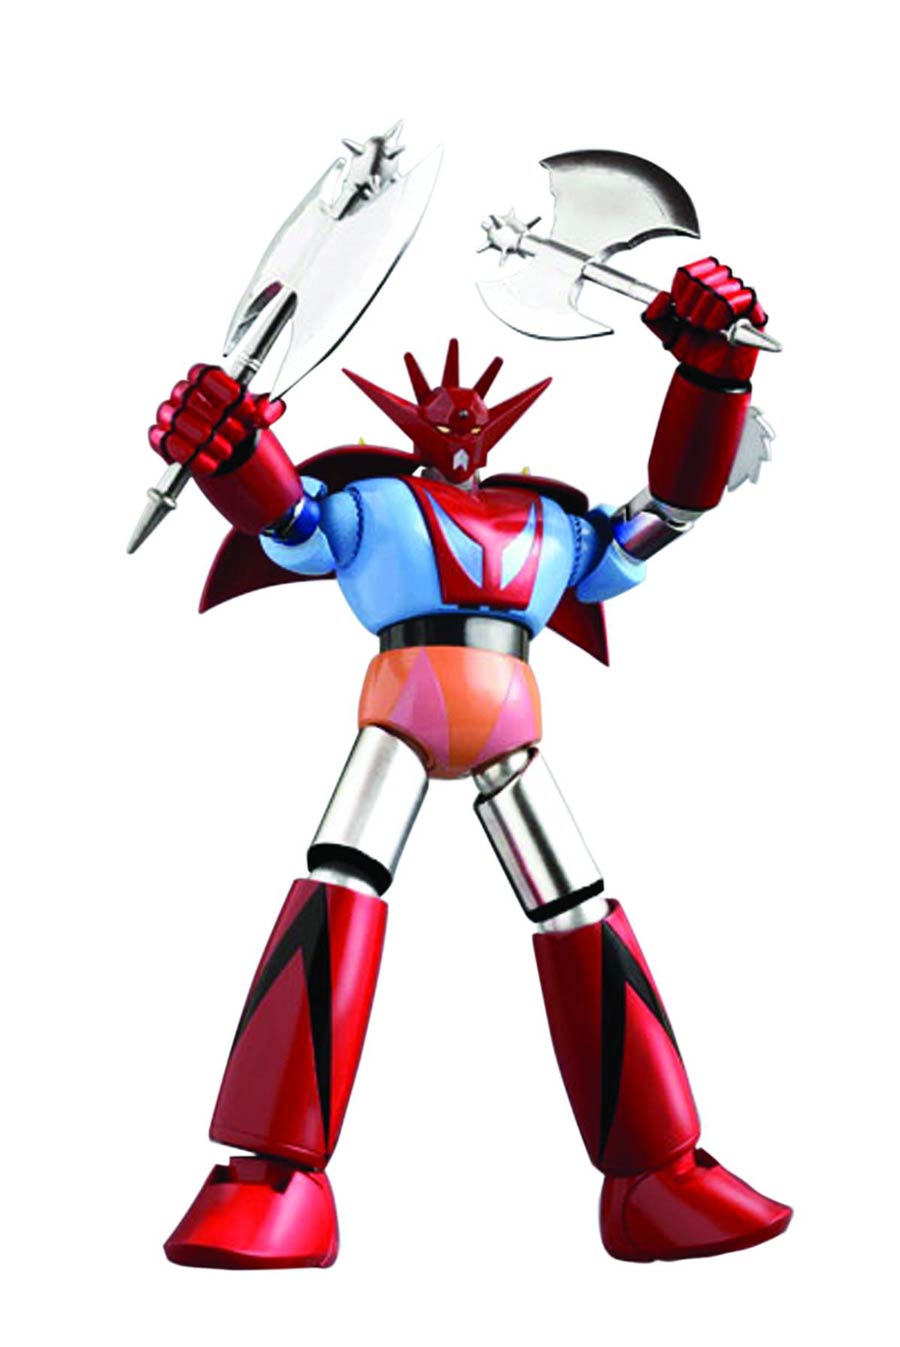 Dynamite Action No 18 Robo Getter Dragon Action Figure Red Version